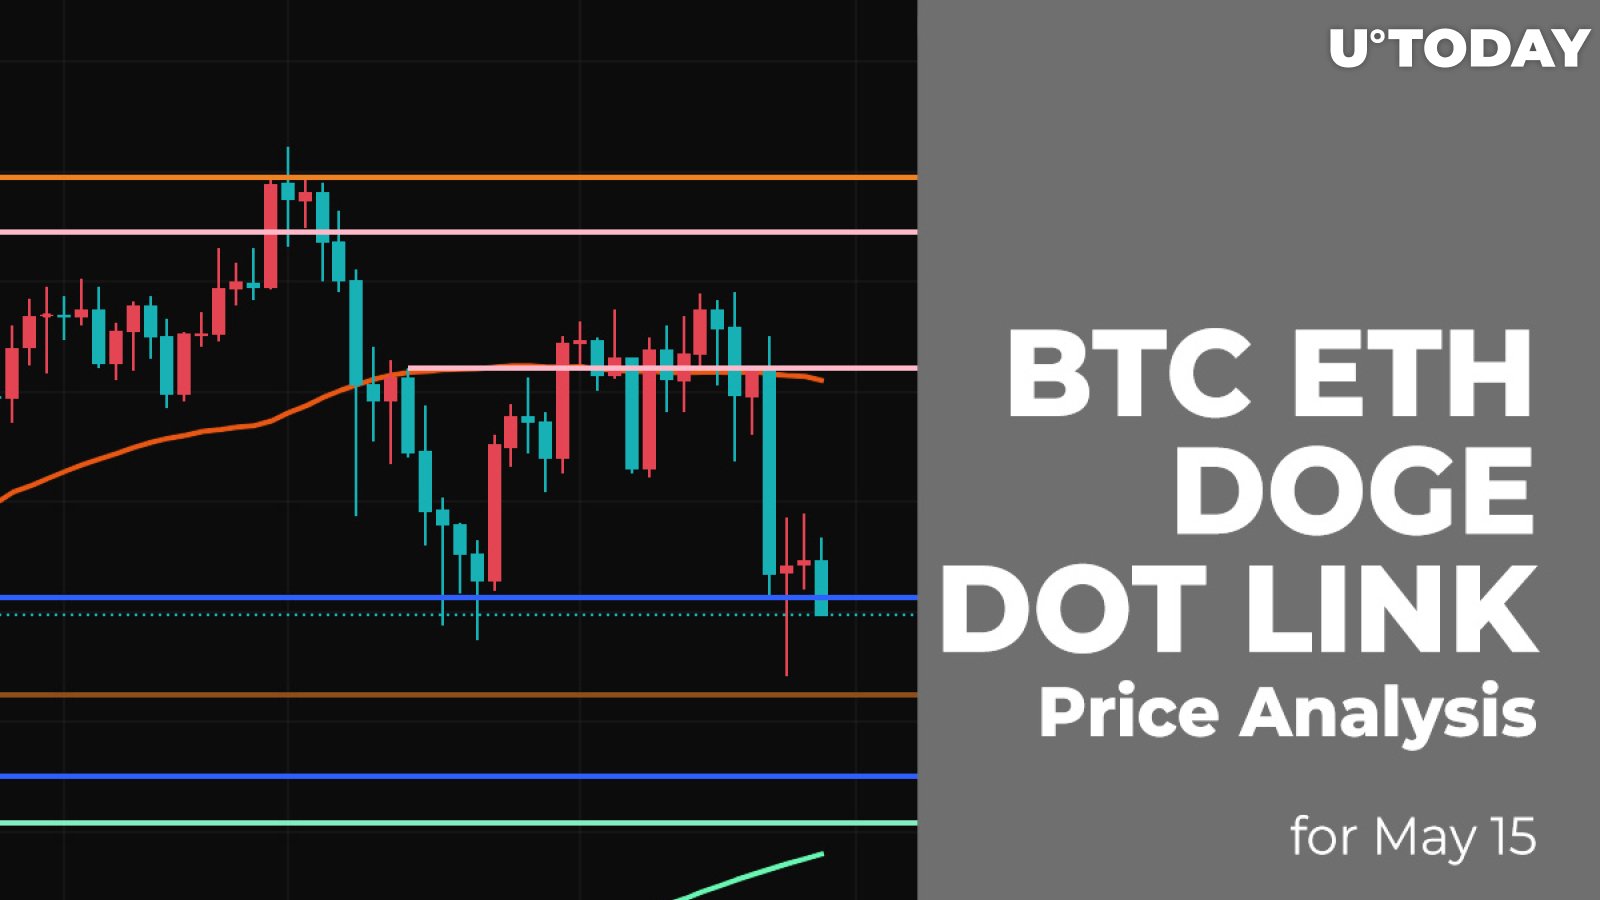 BTC, ETH, DOGE, DOT and LINK Price Analysis for May 15